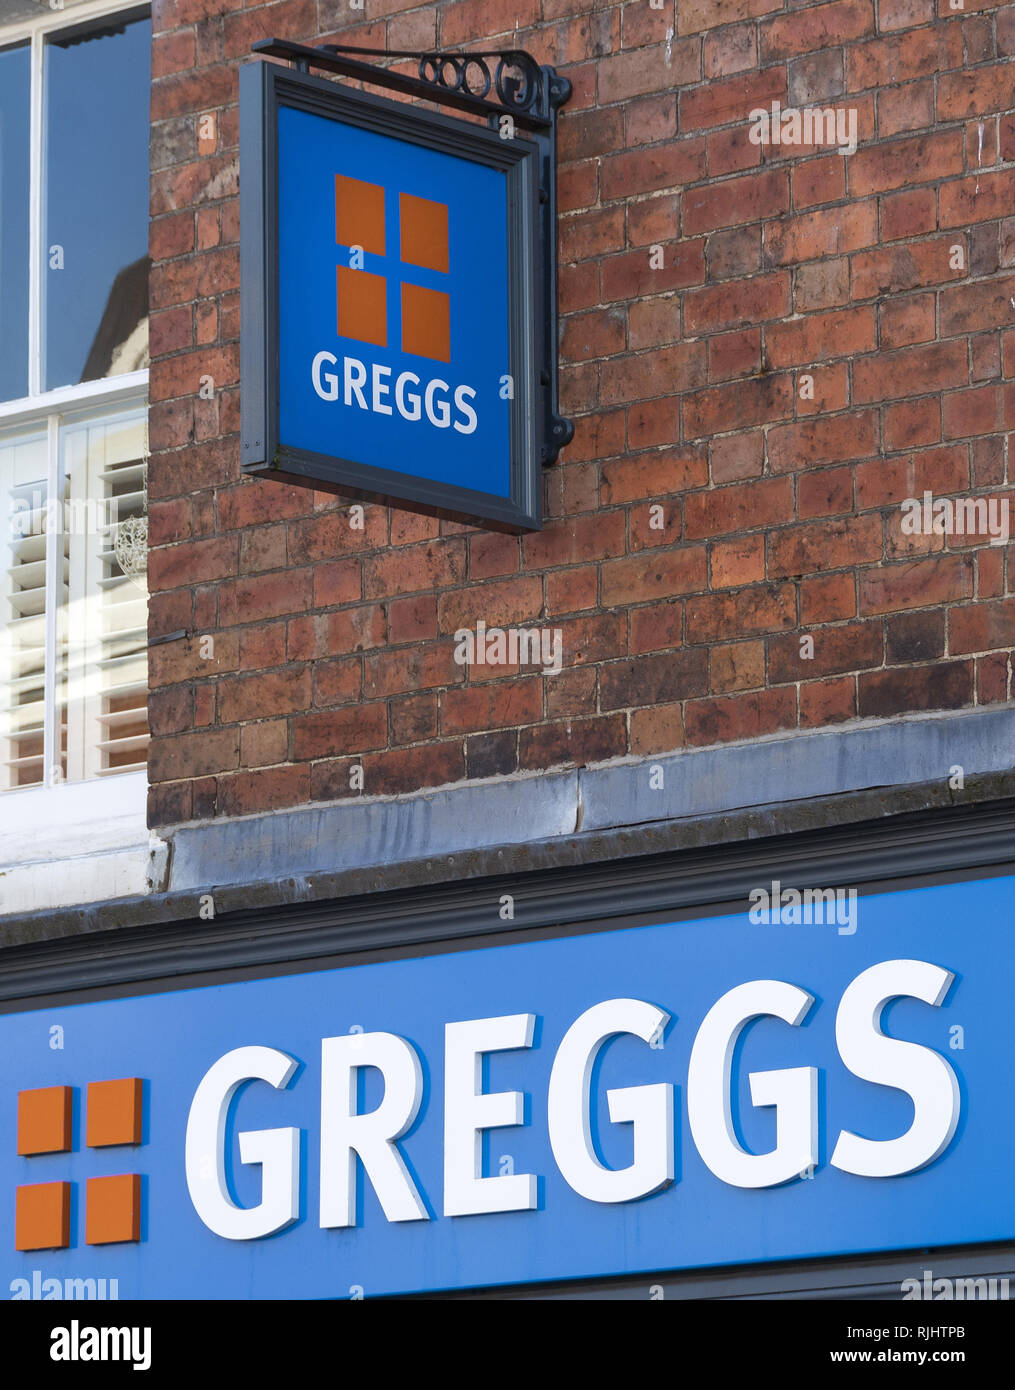 Greggs the baker shop front and logo Stock Photo